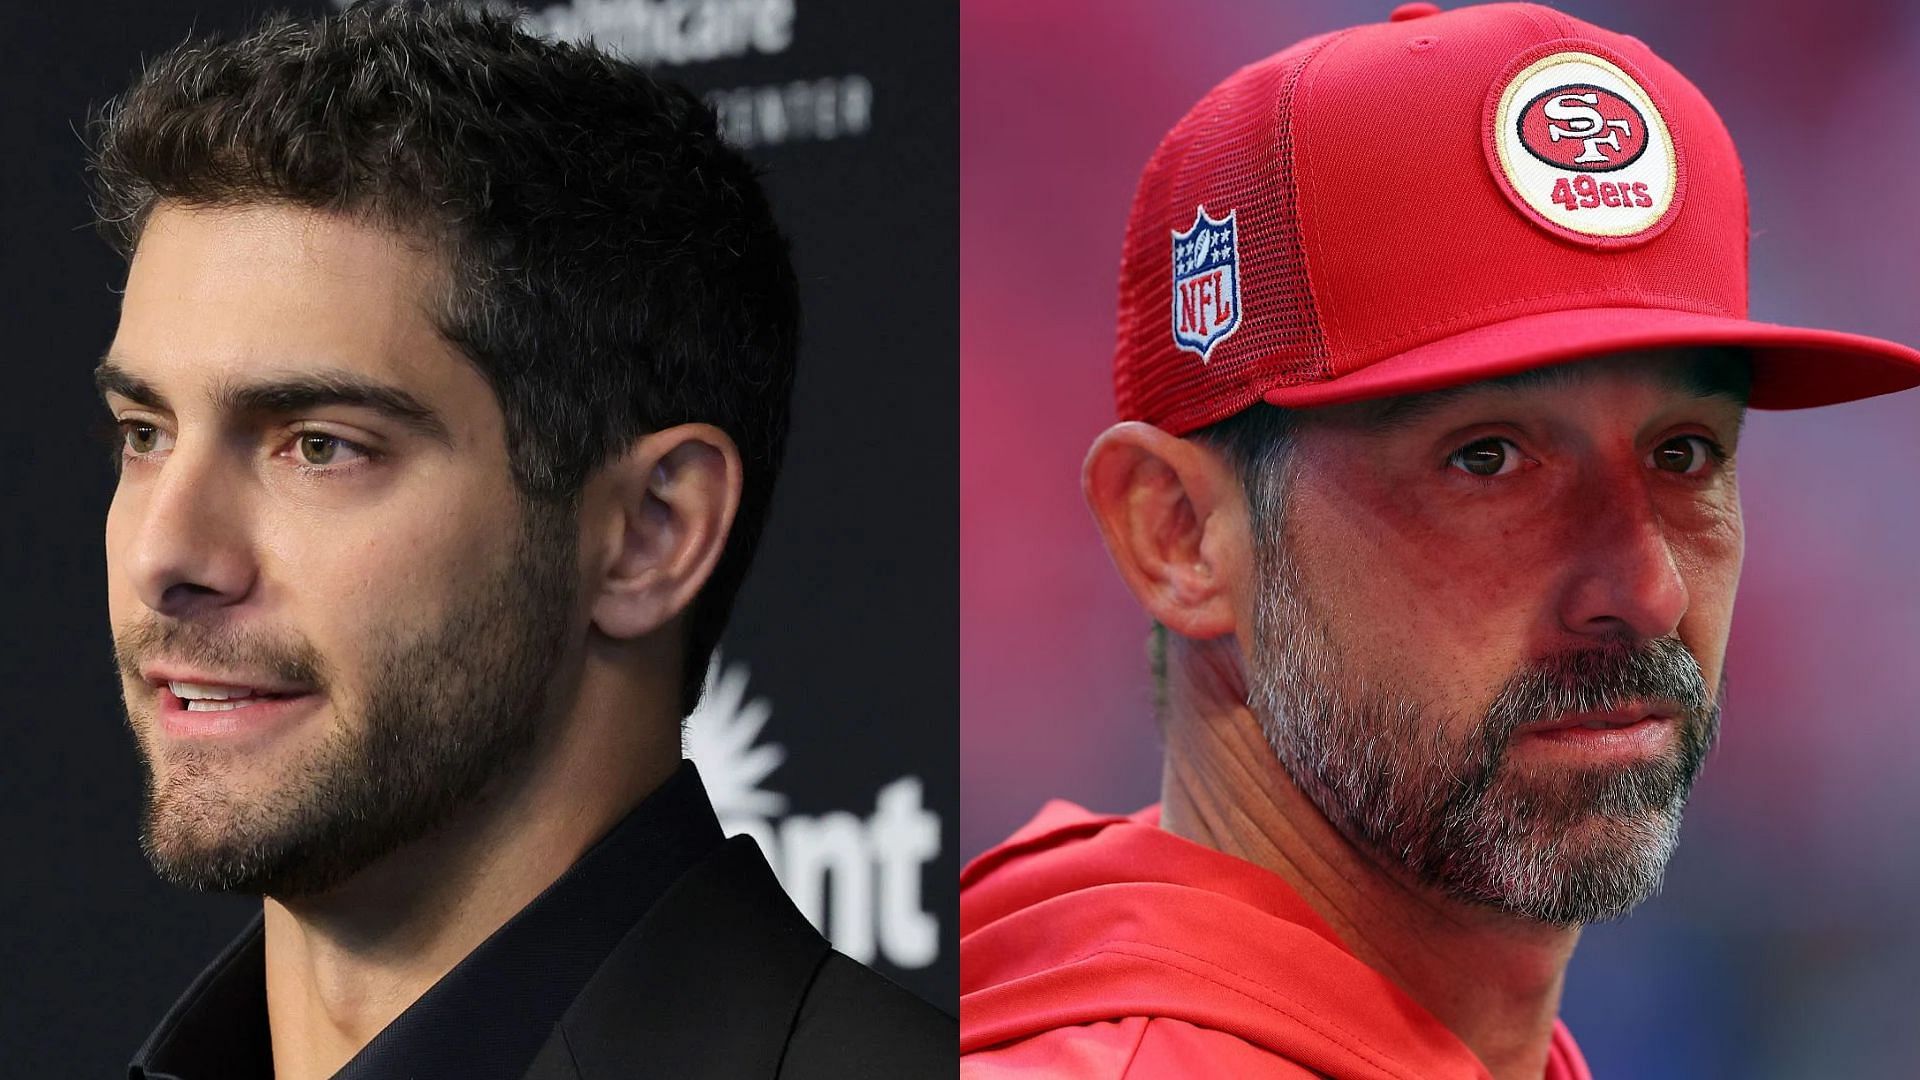 Jimmy Garoppolo made his rebuttal to the statements of his former head coach Kyle Shanahan